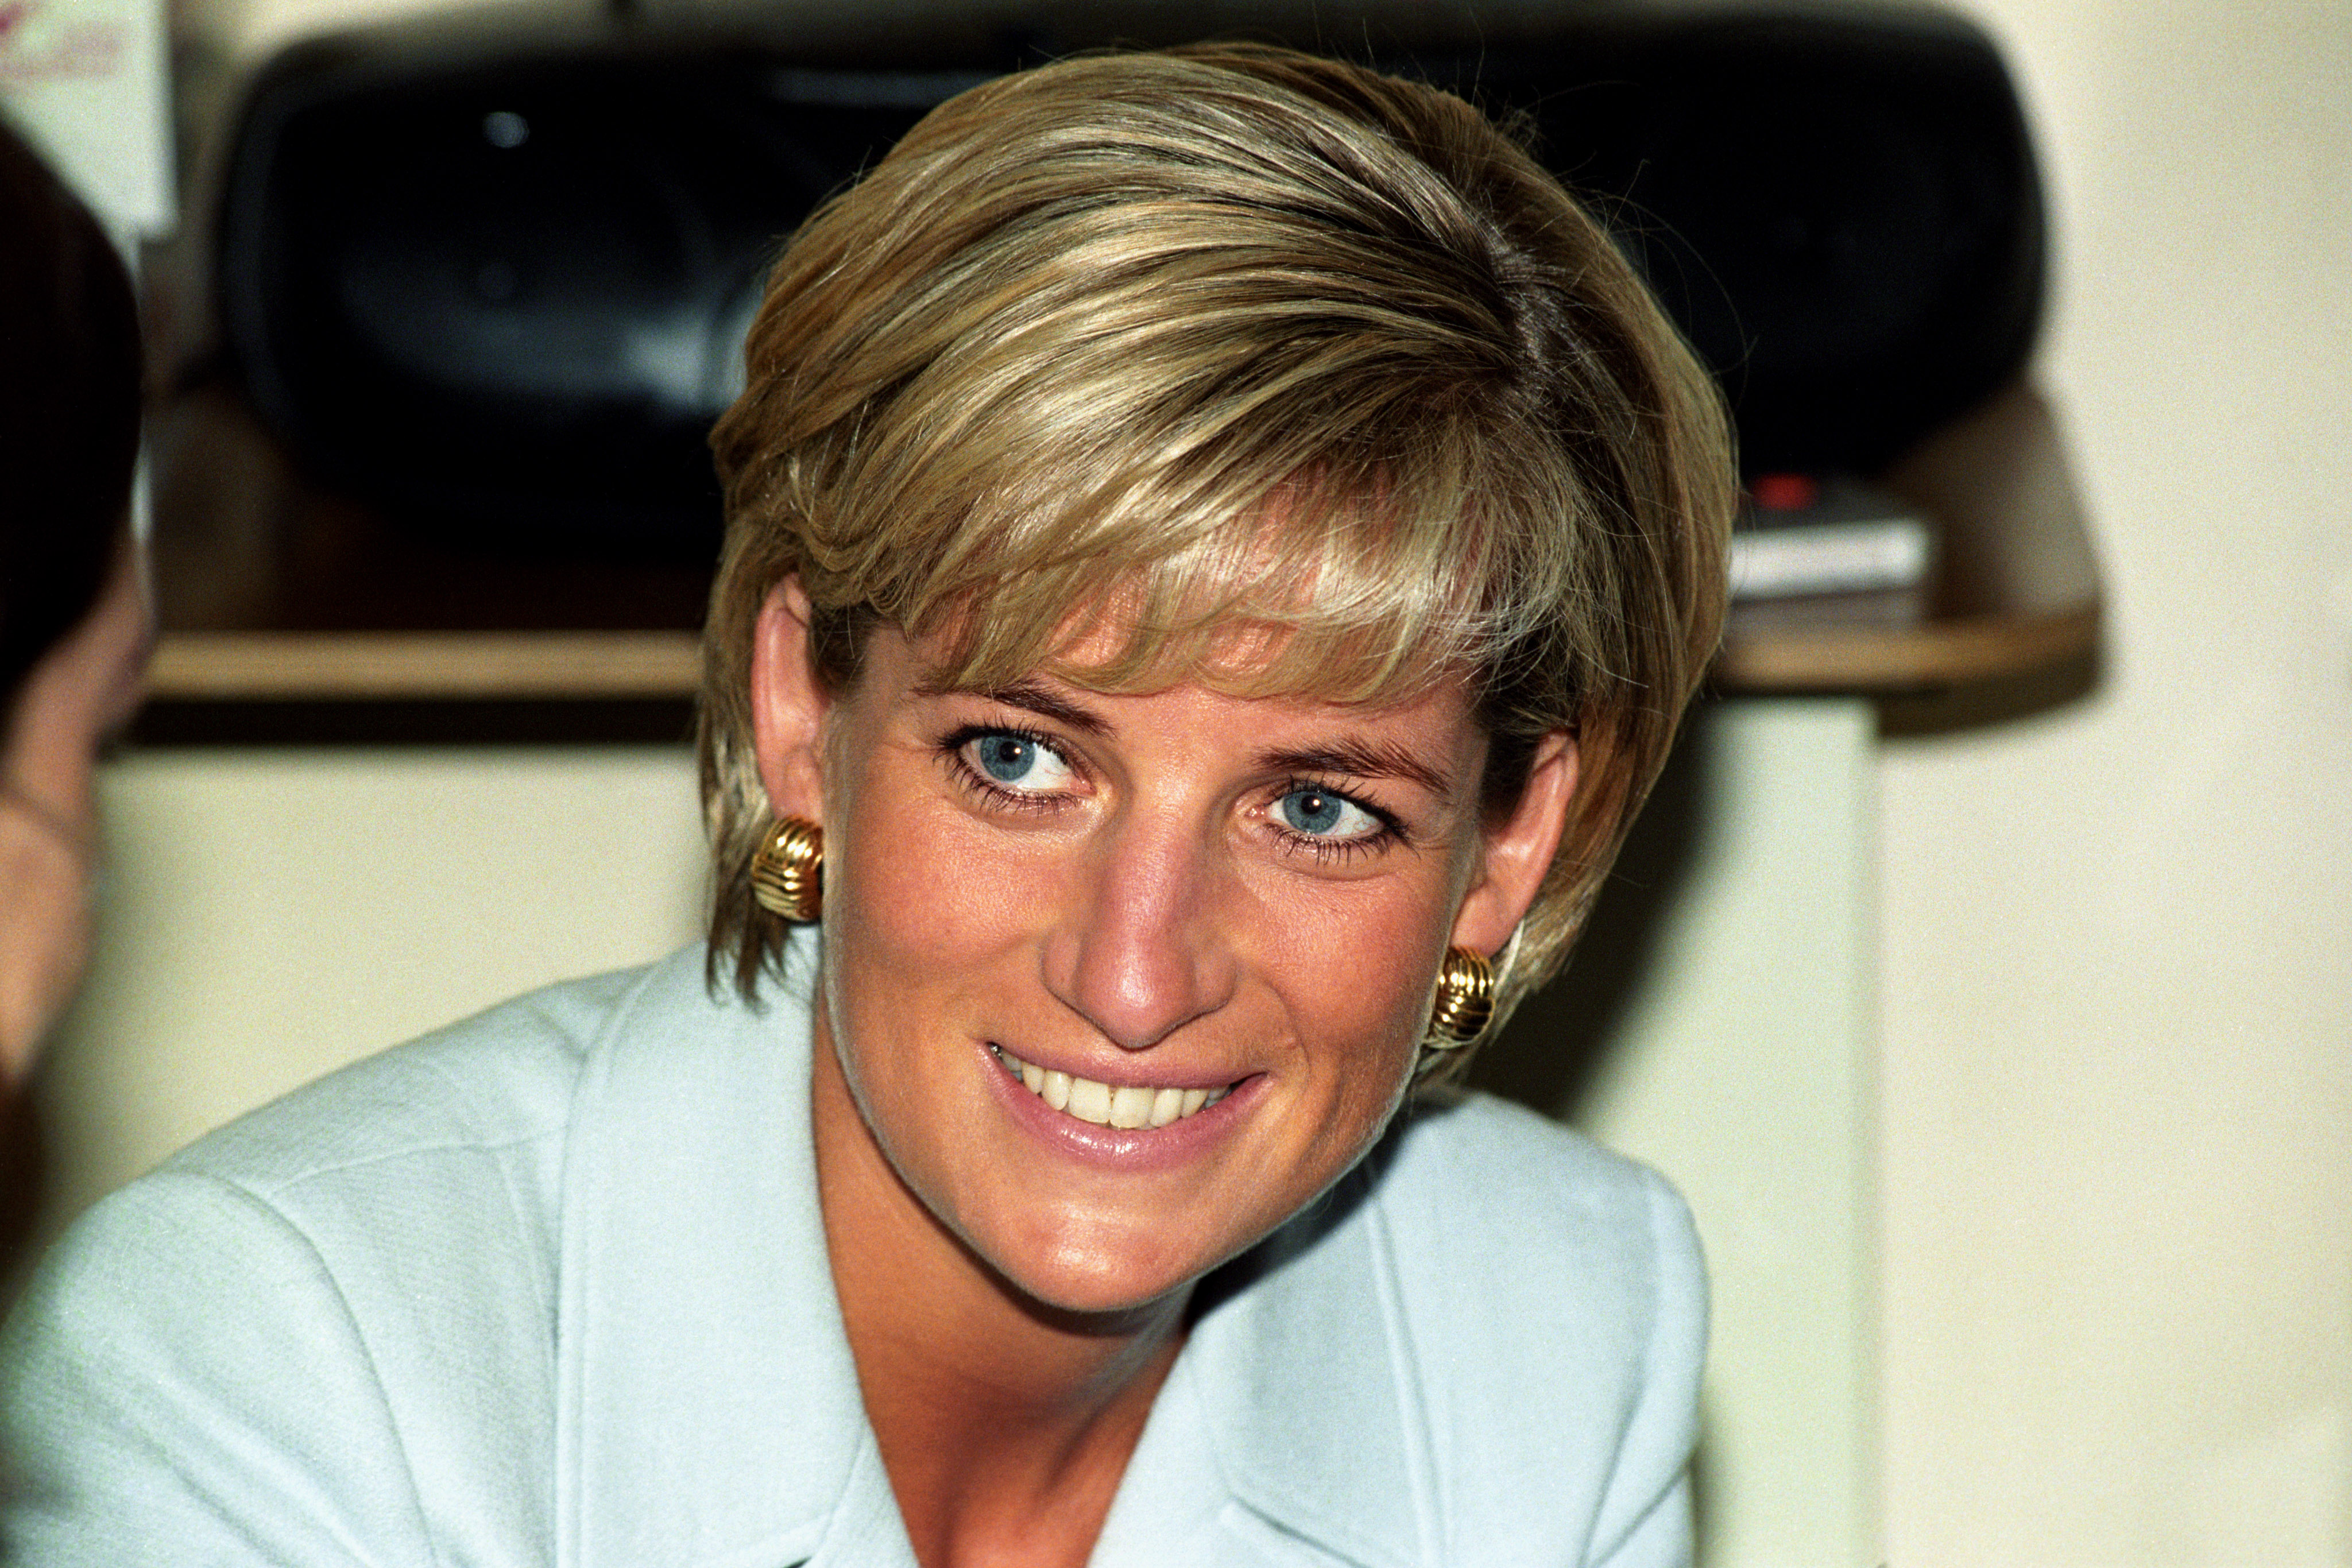 Diana, Princess of Wales, at the Royal Brompton Hospital where she visited Cystic Fibrosis patients.   31/8/97 The Princess was killed in a car crash in Paris along with her friend, Dodi Al Fayed, and the driver of their car.   (Photo by Neil Munns - PA Images/PA Images via Getty Images) (Neil Munns - PA Images—PA Images via Getty Images)